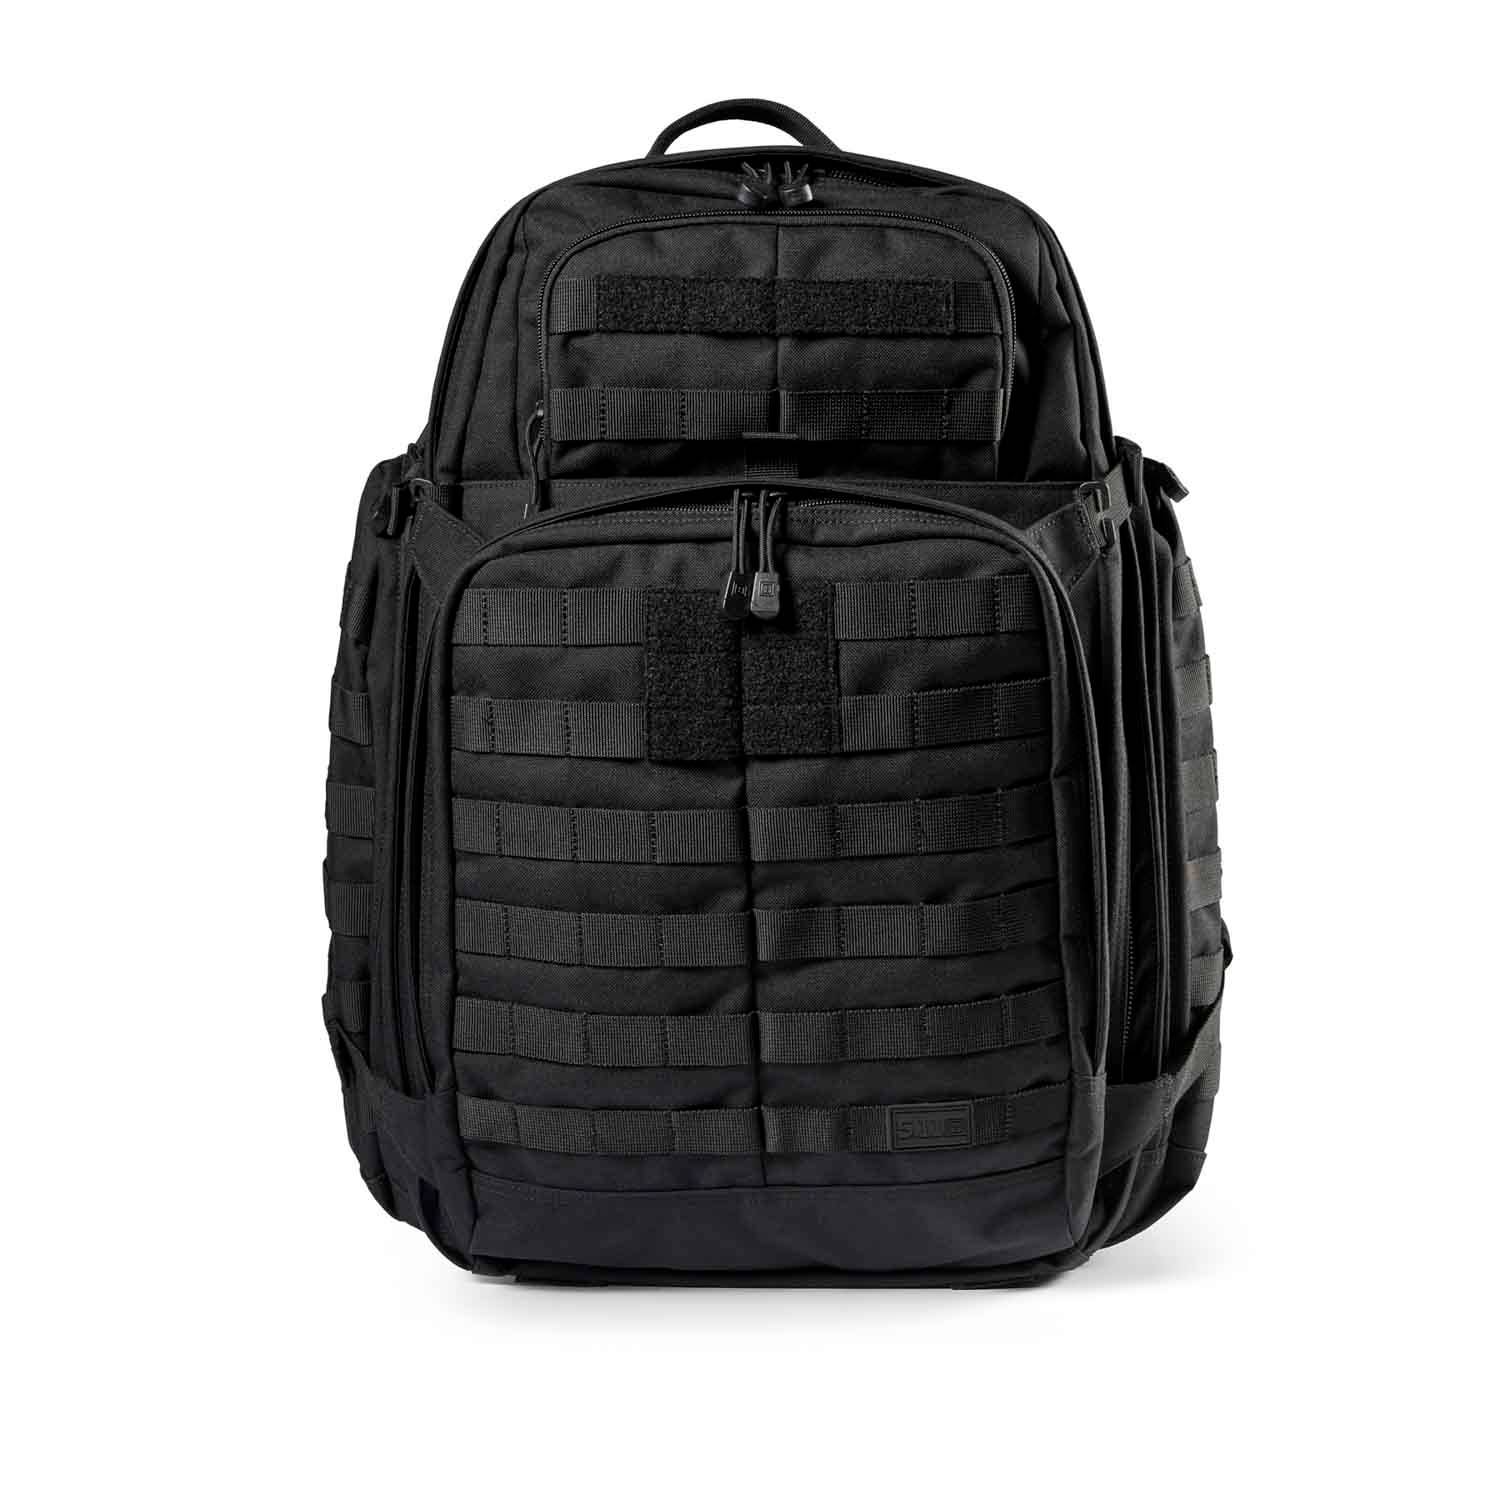 5.11 TACTICAL RUSH 72 2.0 BACKPACK